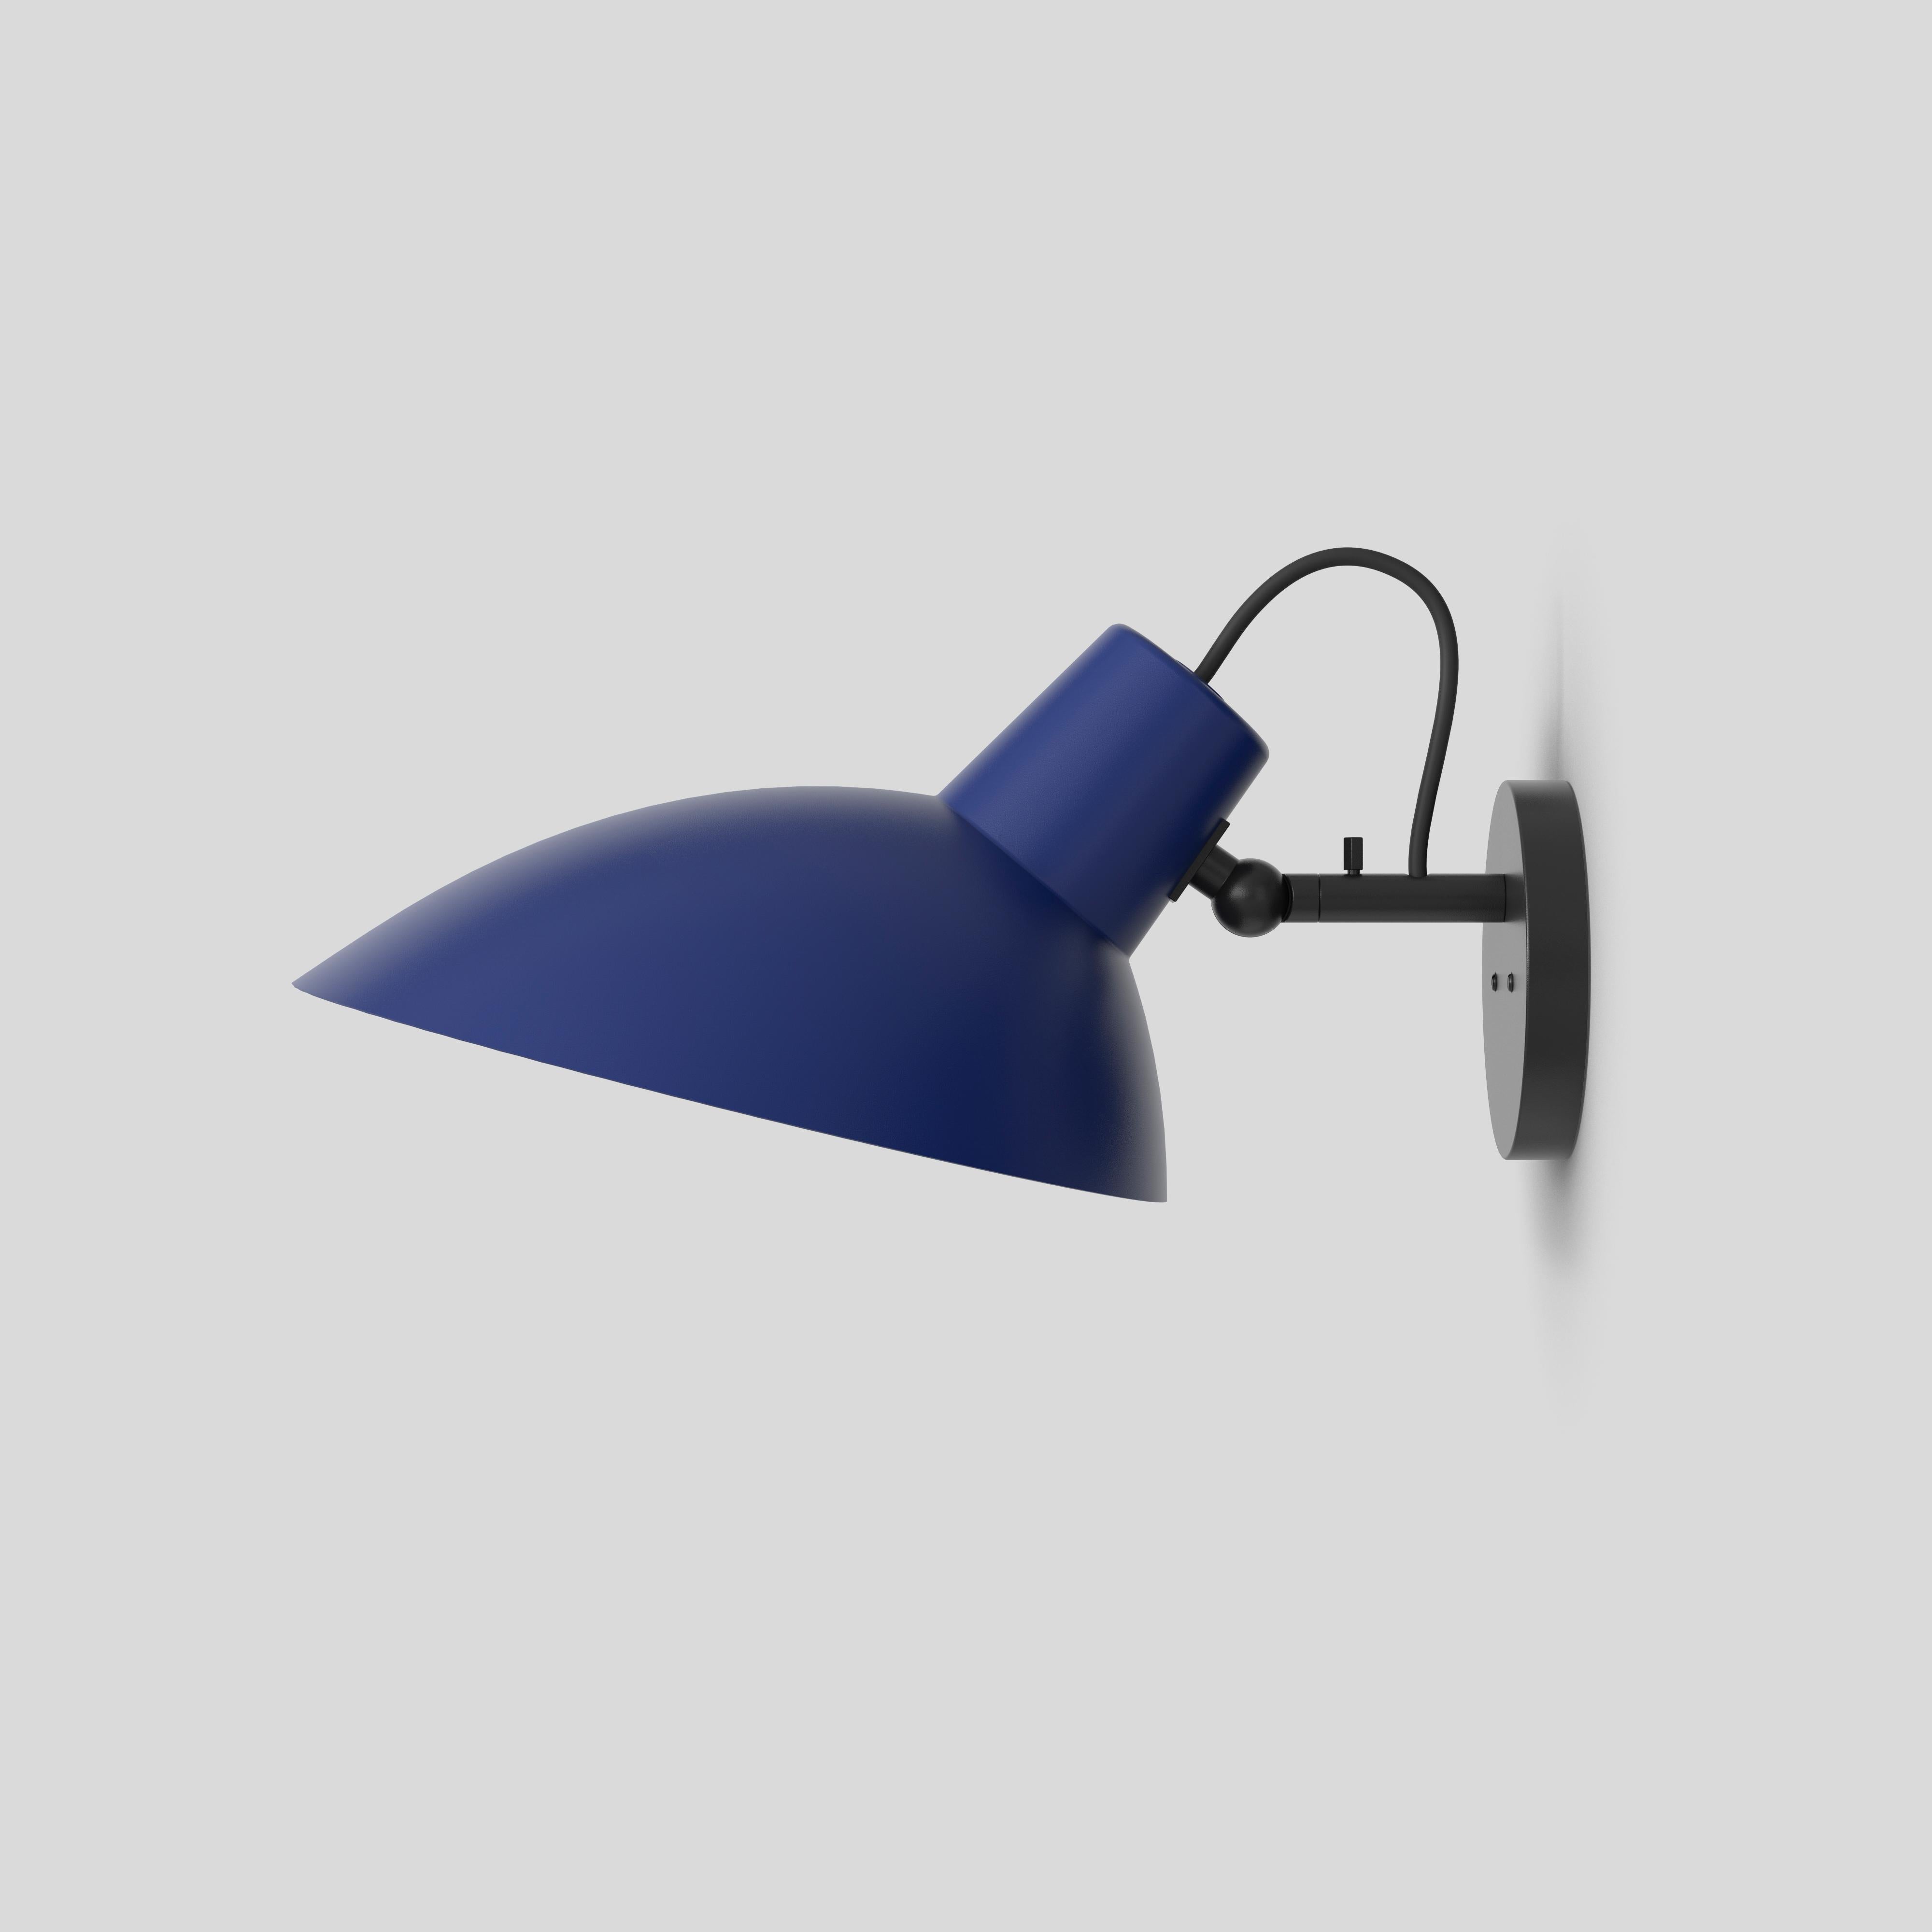 VV Cinquanta wall lamp.
Design by Vittoriano Viganò.
This version is with blue lacquered reflector and black mount.

The VV Cinquanta features an elegant and versatile posable direct light source that can swivel and tilt. The wall model is